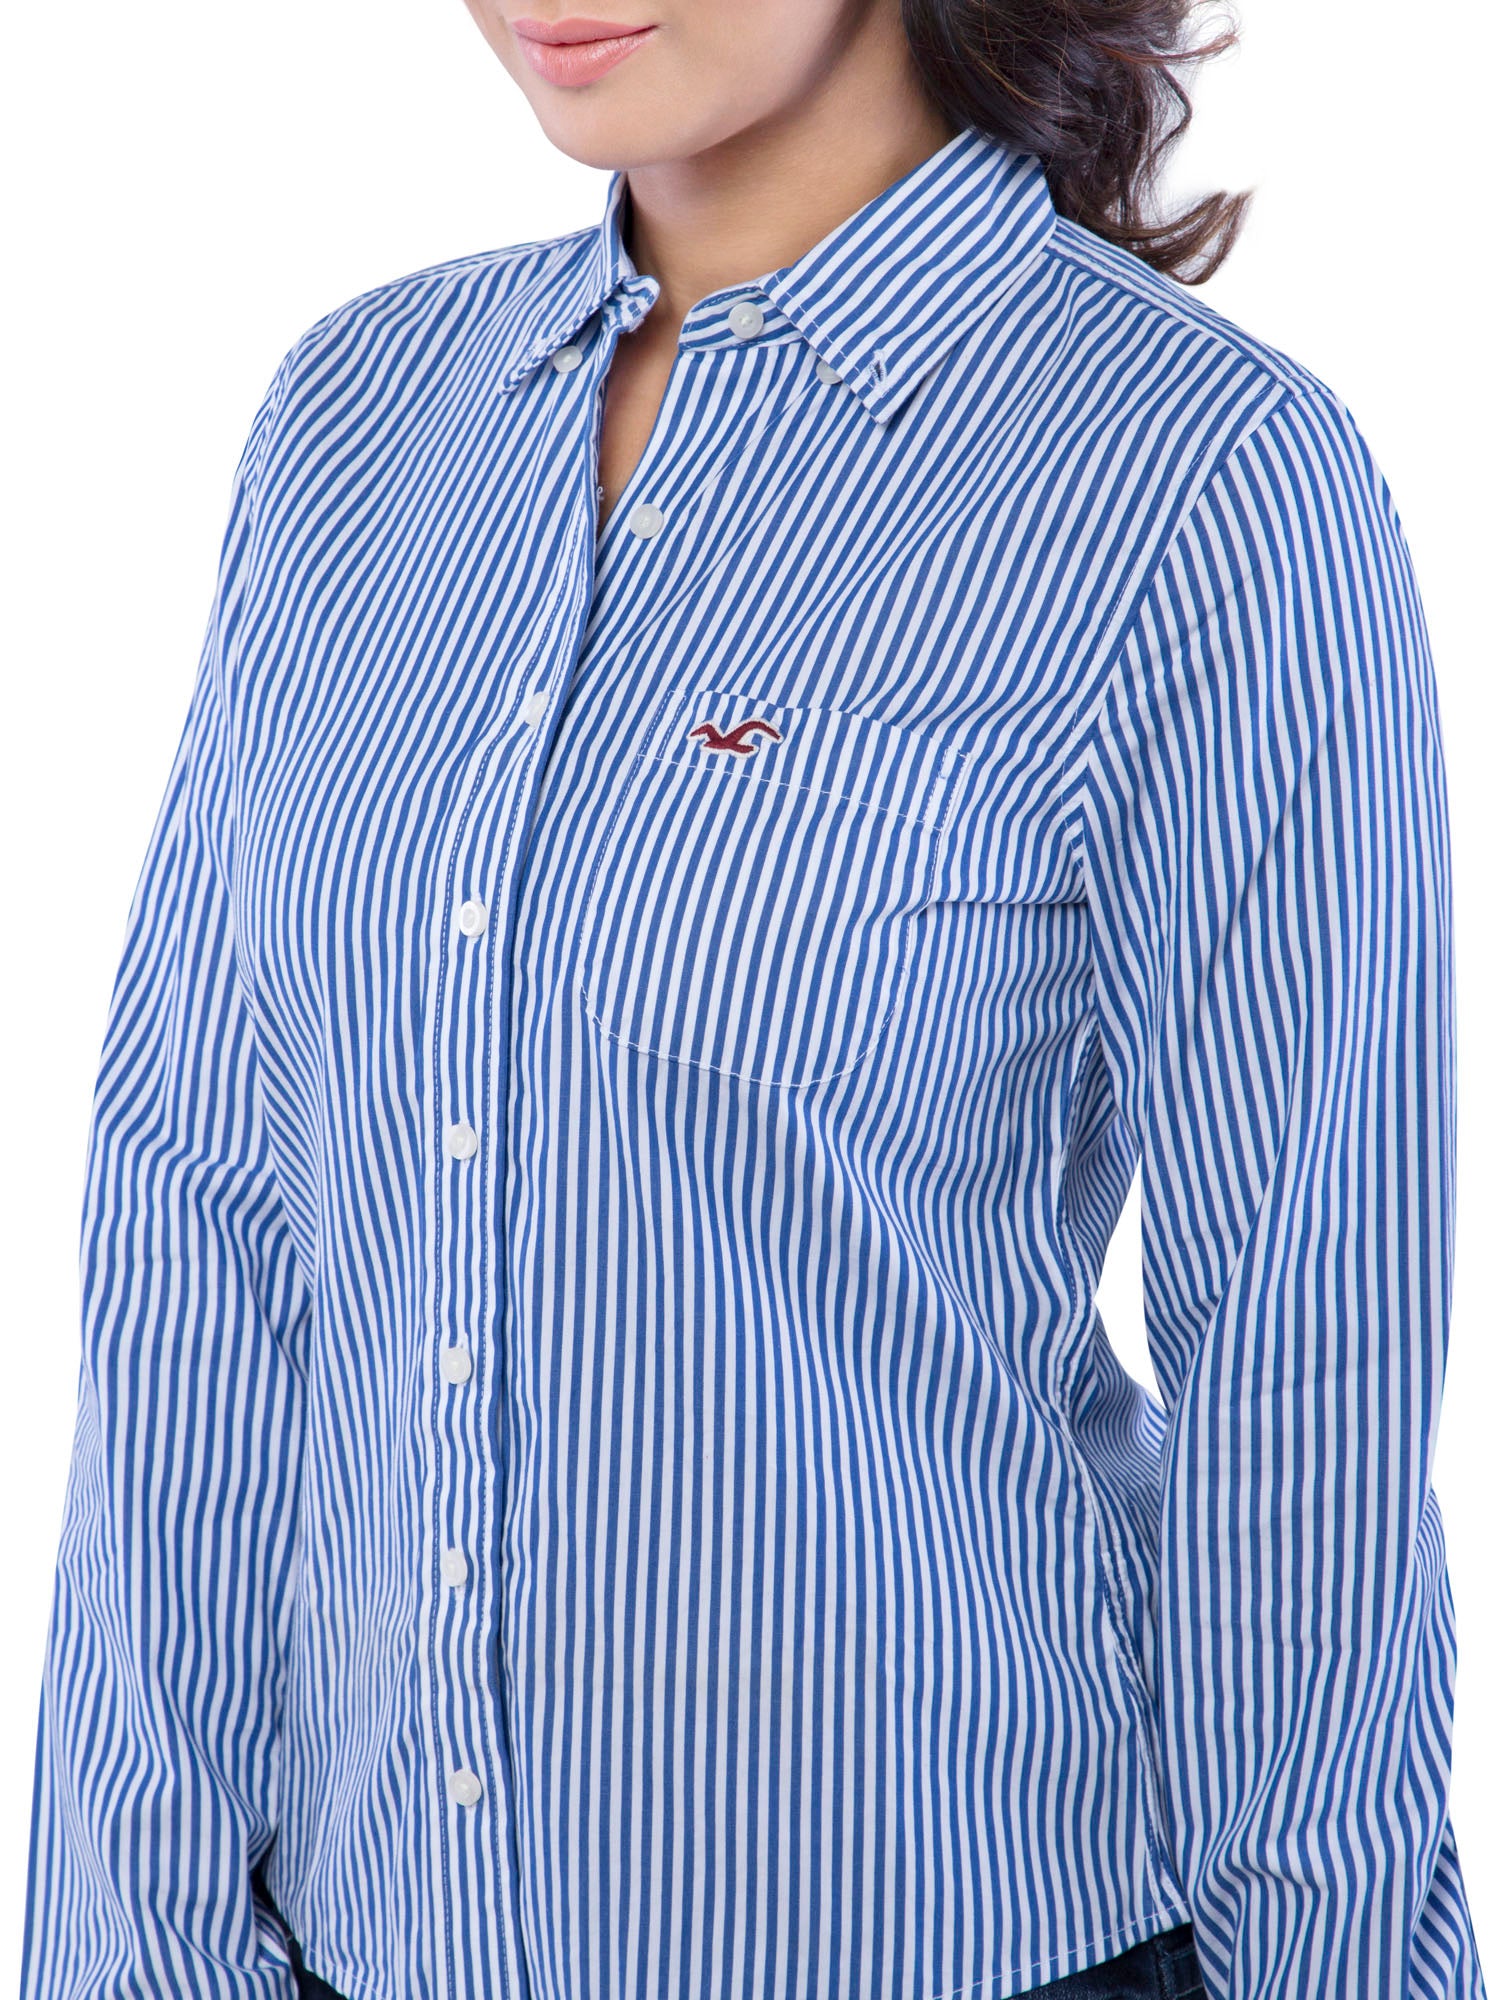 HOLLISTER WOMEN'S JUNIOR Casual Blue and White BUTTON DOWN SHIRT